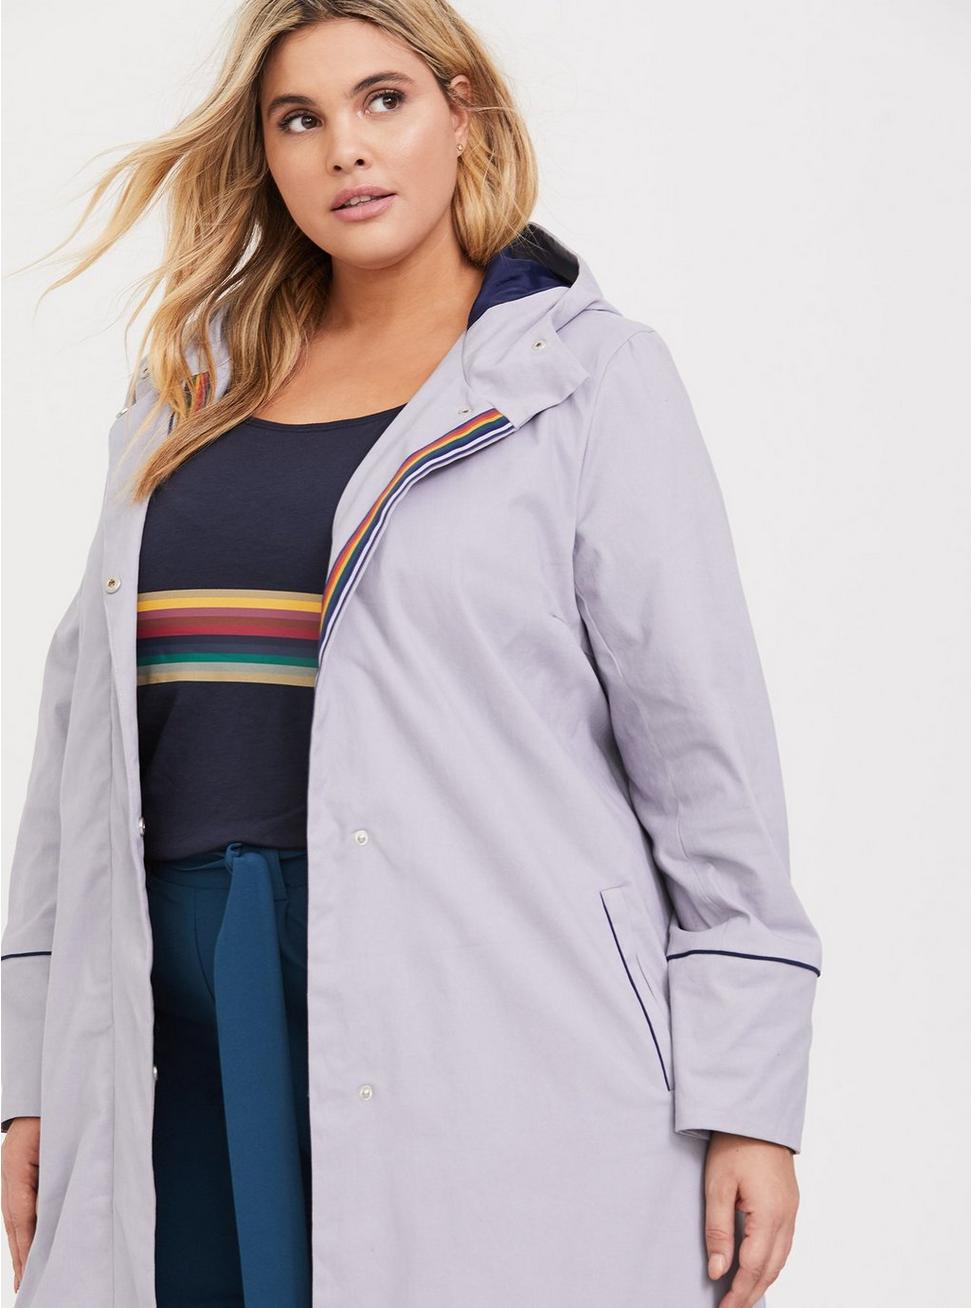 charlyn ng recommends Torrid Doctor Who Coat